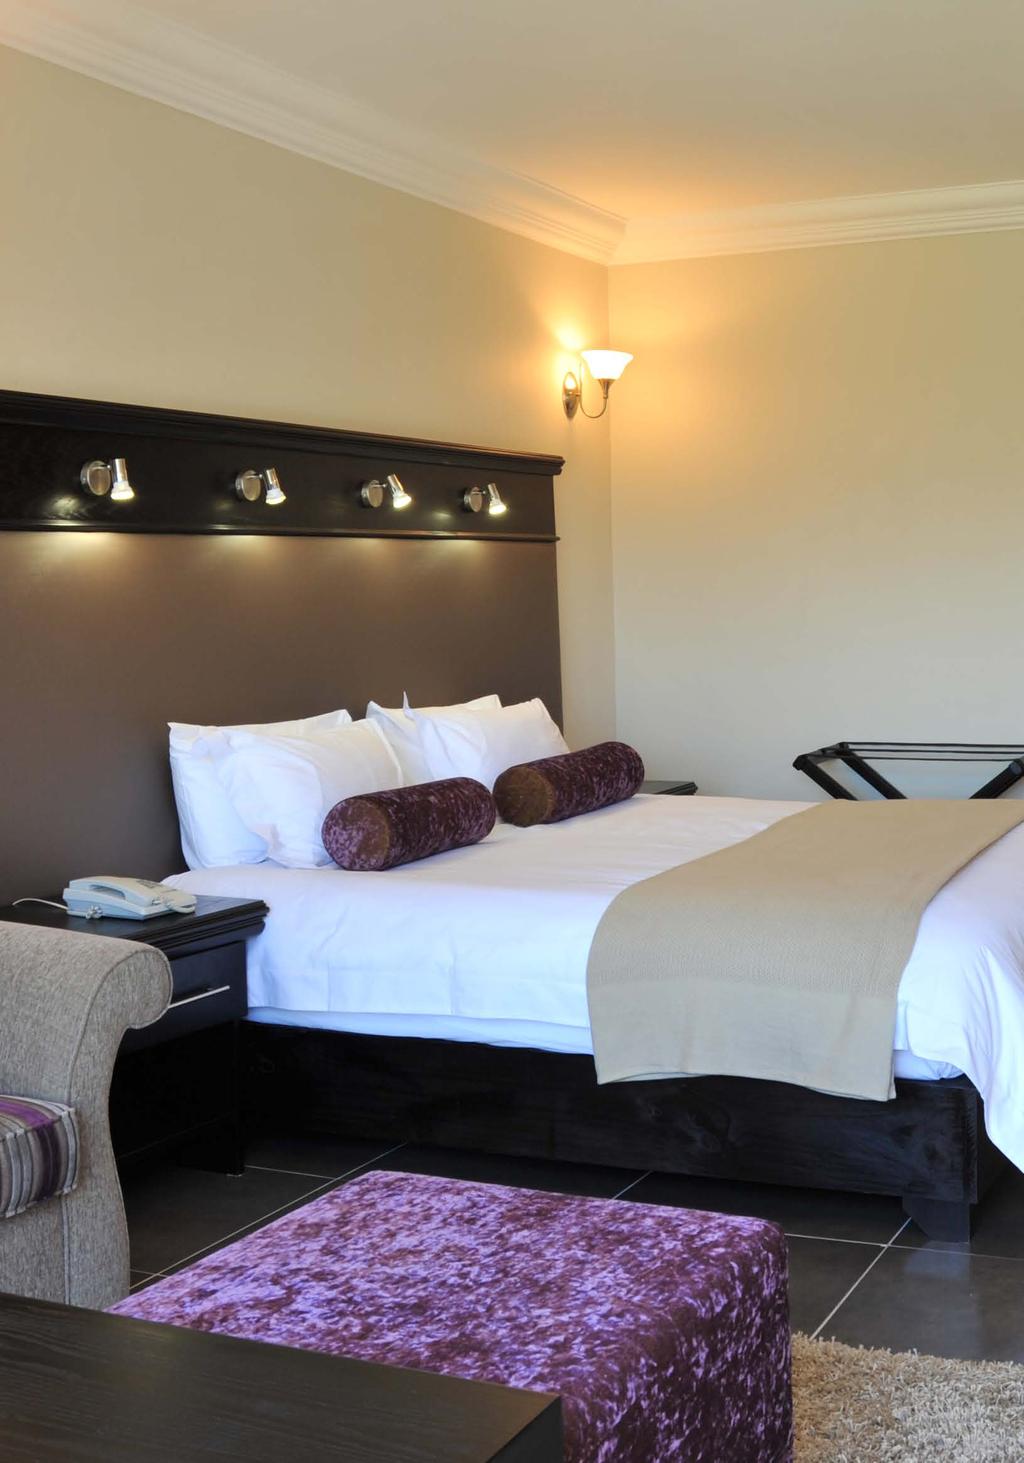 Accommodation Mont Aux Sources has three room types available. Each option offers cosy beds, simple amenities and a country atmosphere for a good night s sleep. 84 Rooms: 1.